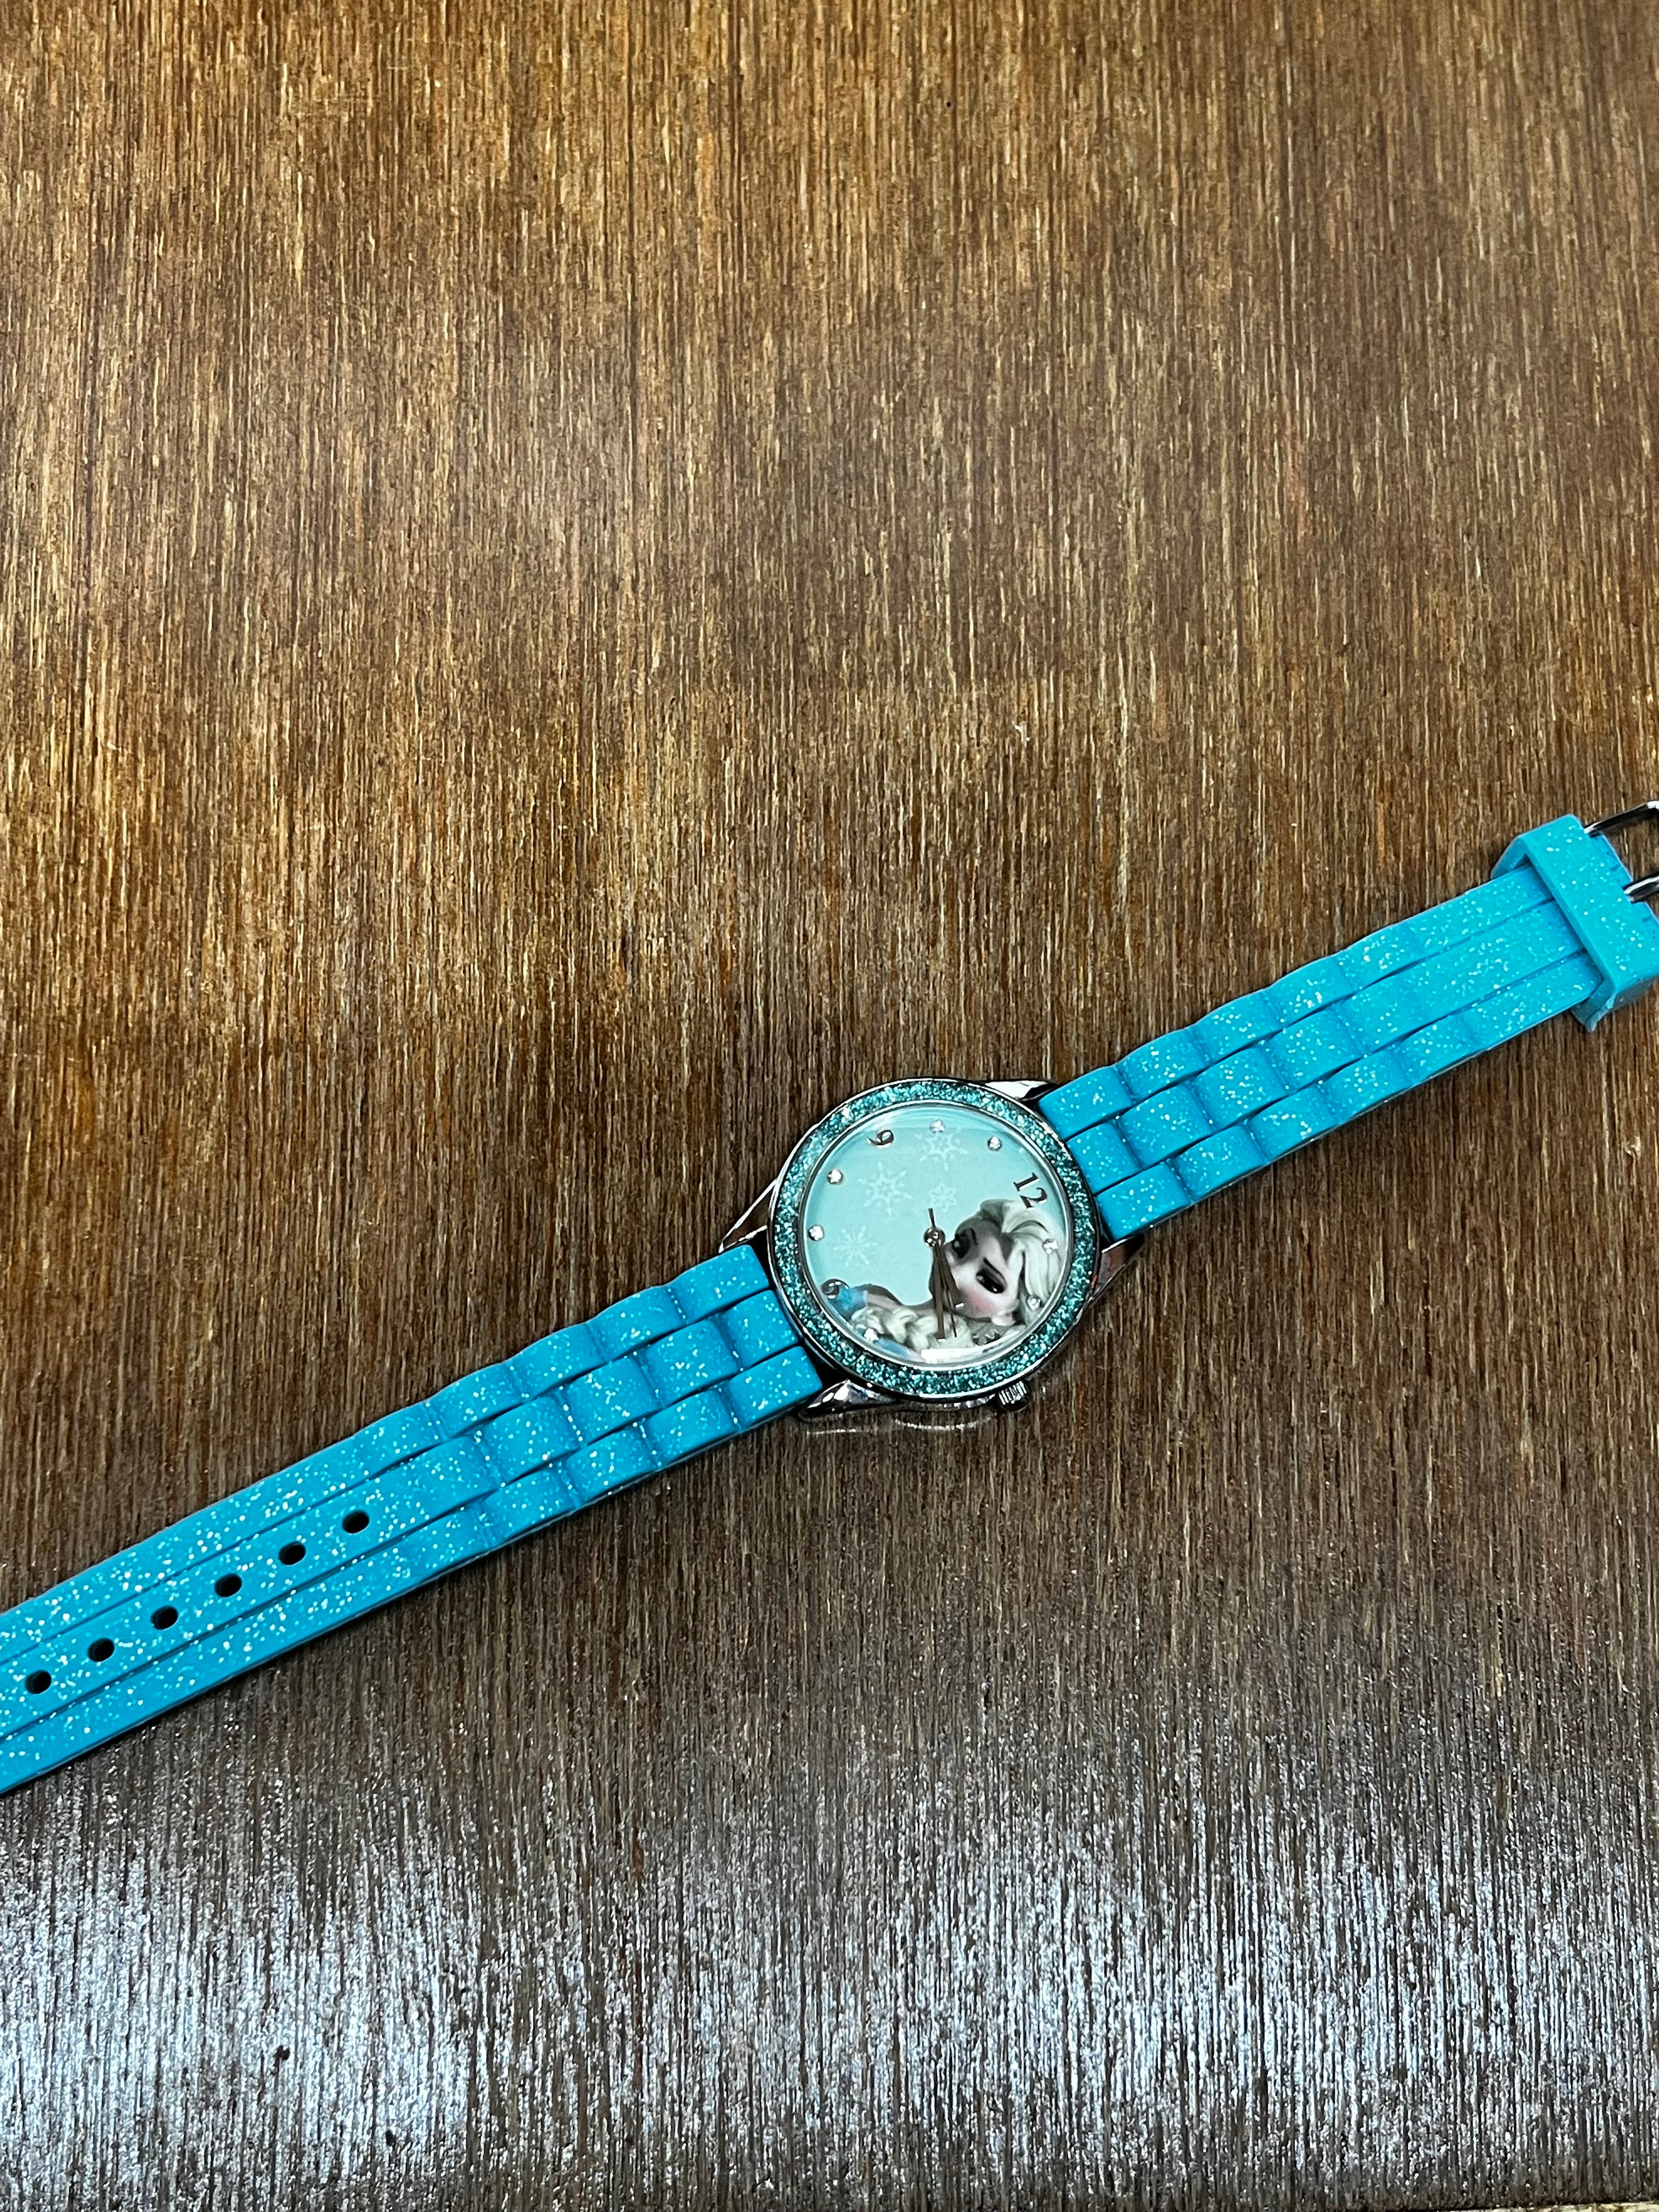 Buy MY PARTY SUPPLIERS Frozen Elsa Watch for Girls,Gift for Girls/Watch for  Children/Digital Watch for Girls/Frozen Theme Gift for Birthday at Amazon.in